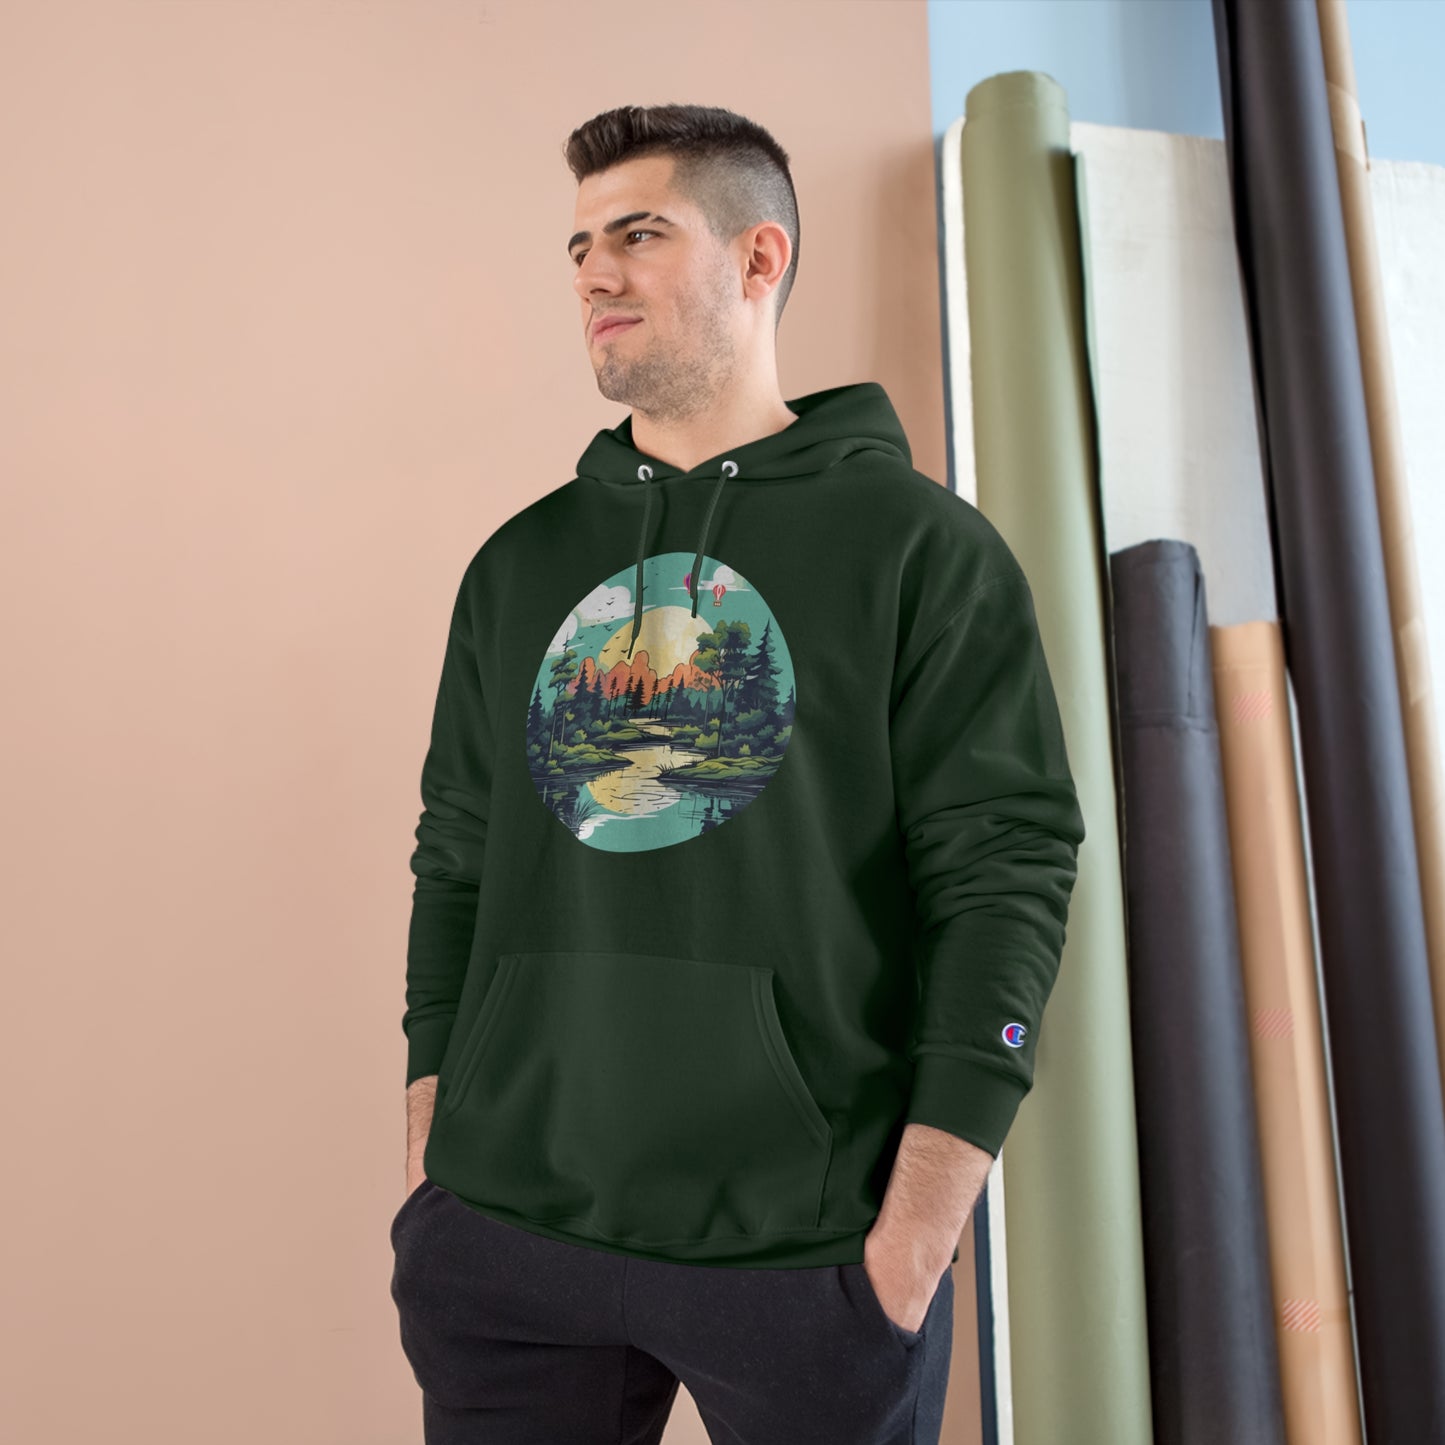 Nature is calling on this great outdoors design made for a very comfortable Champion Hoodie.